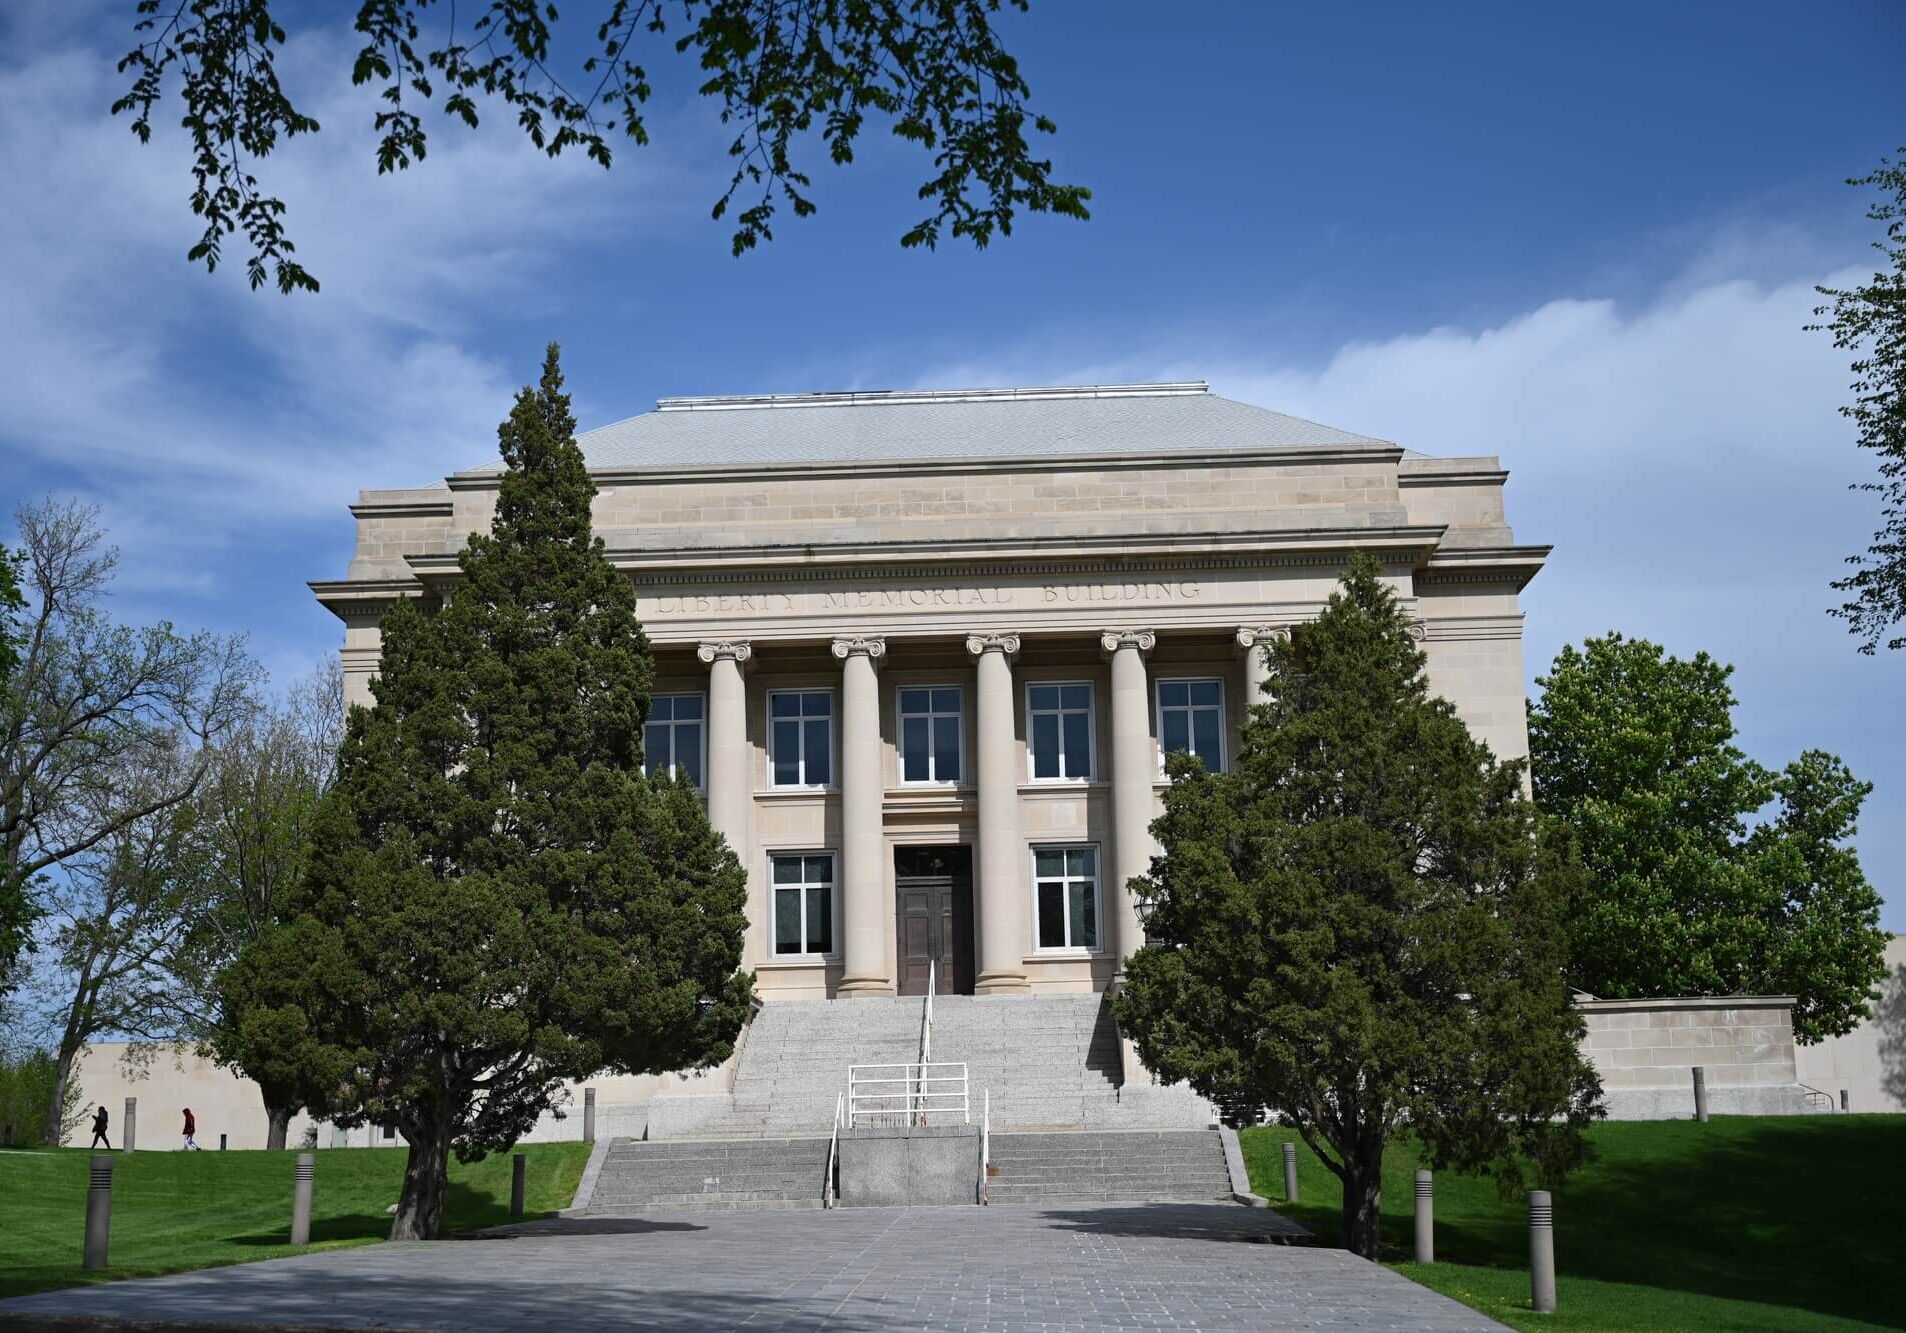 The Liberty Memorial Building that holds the ND State Library.